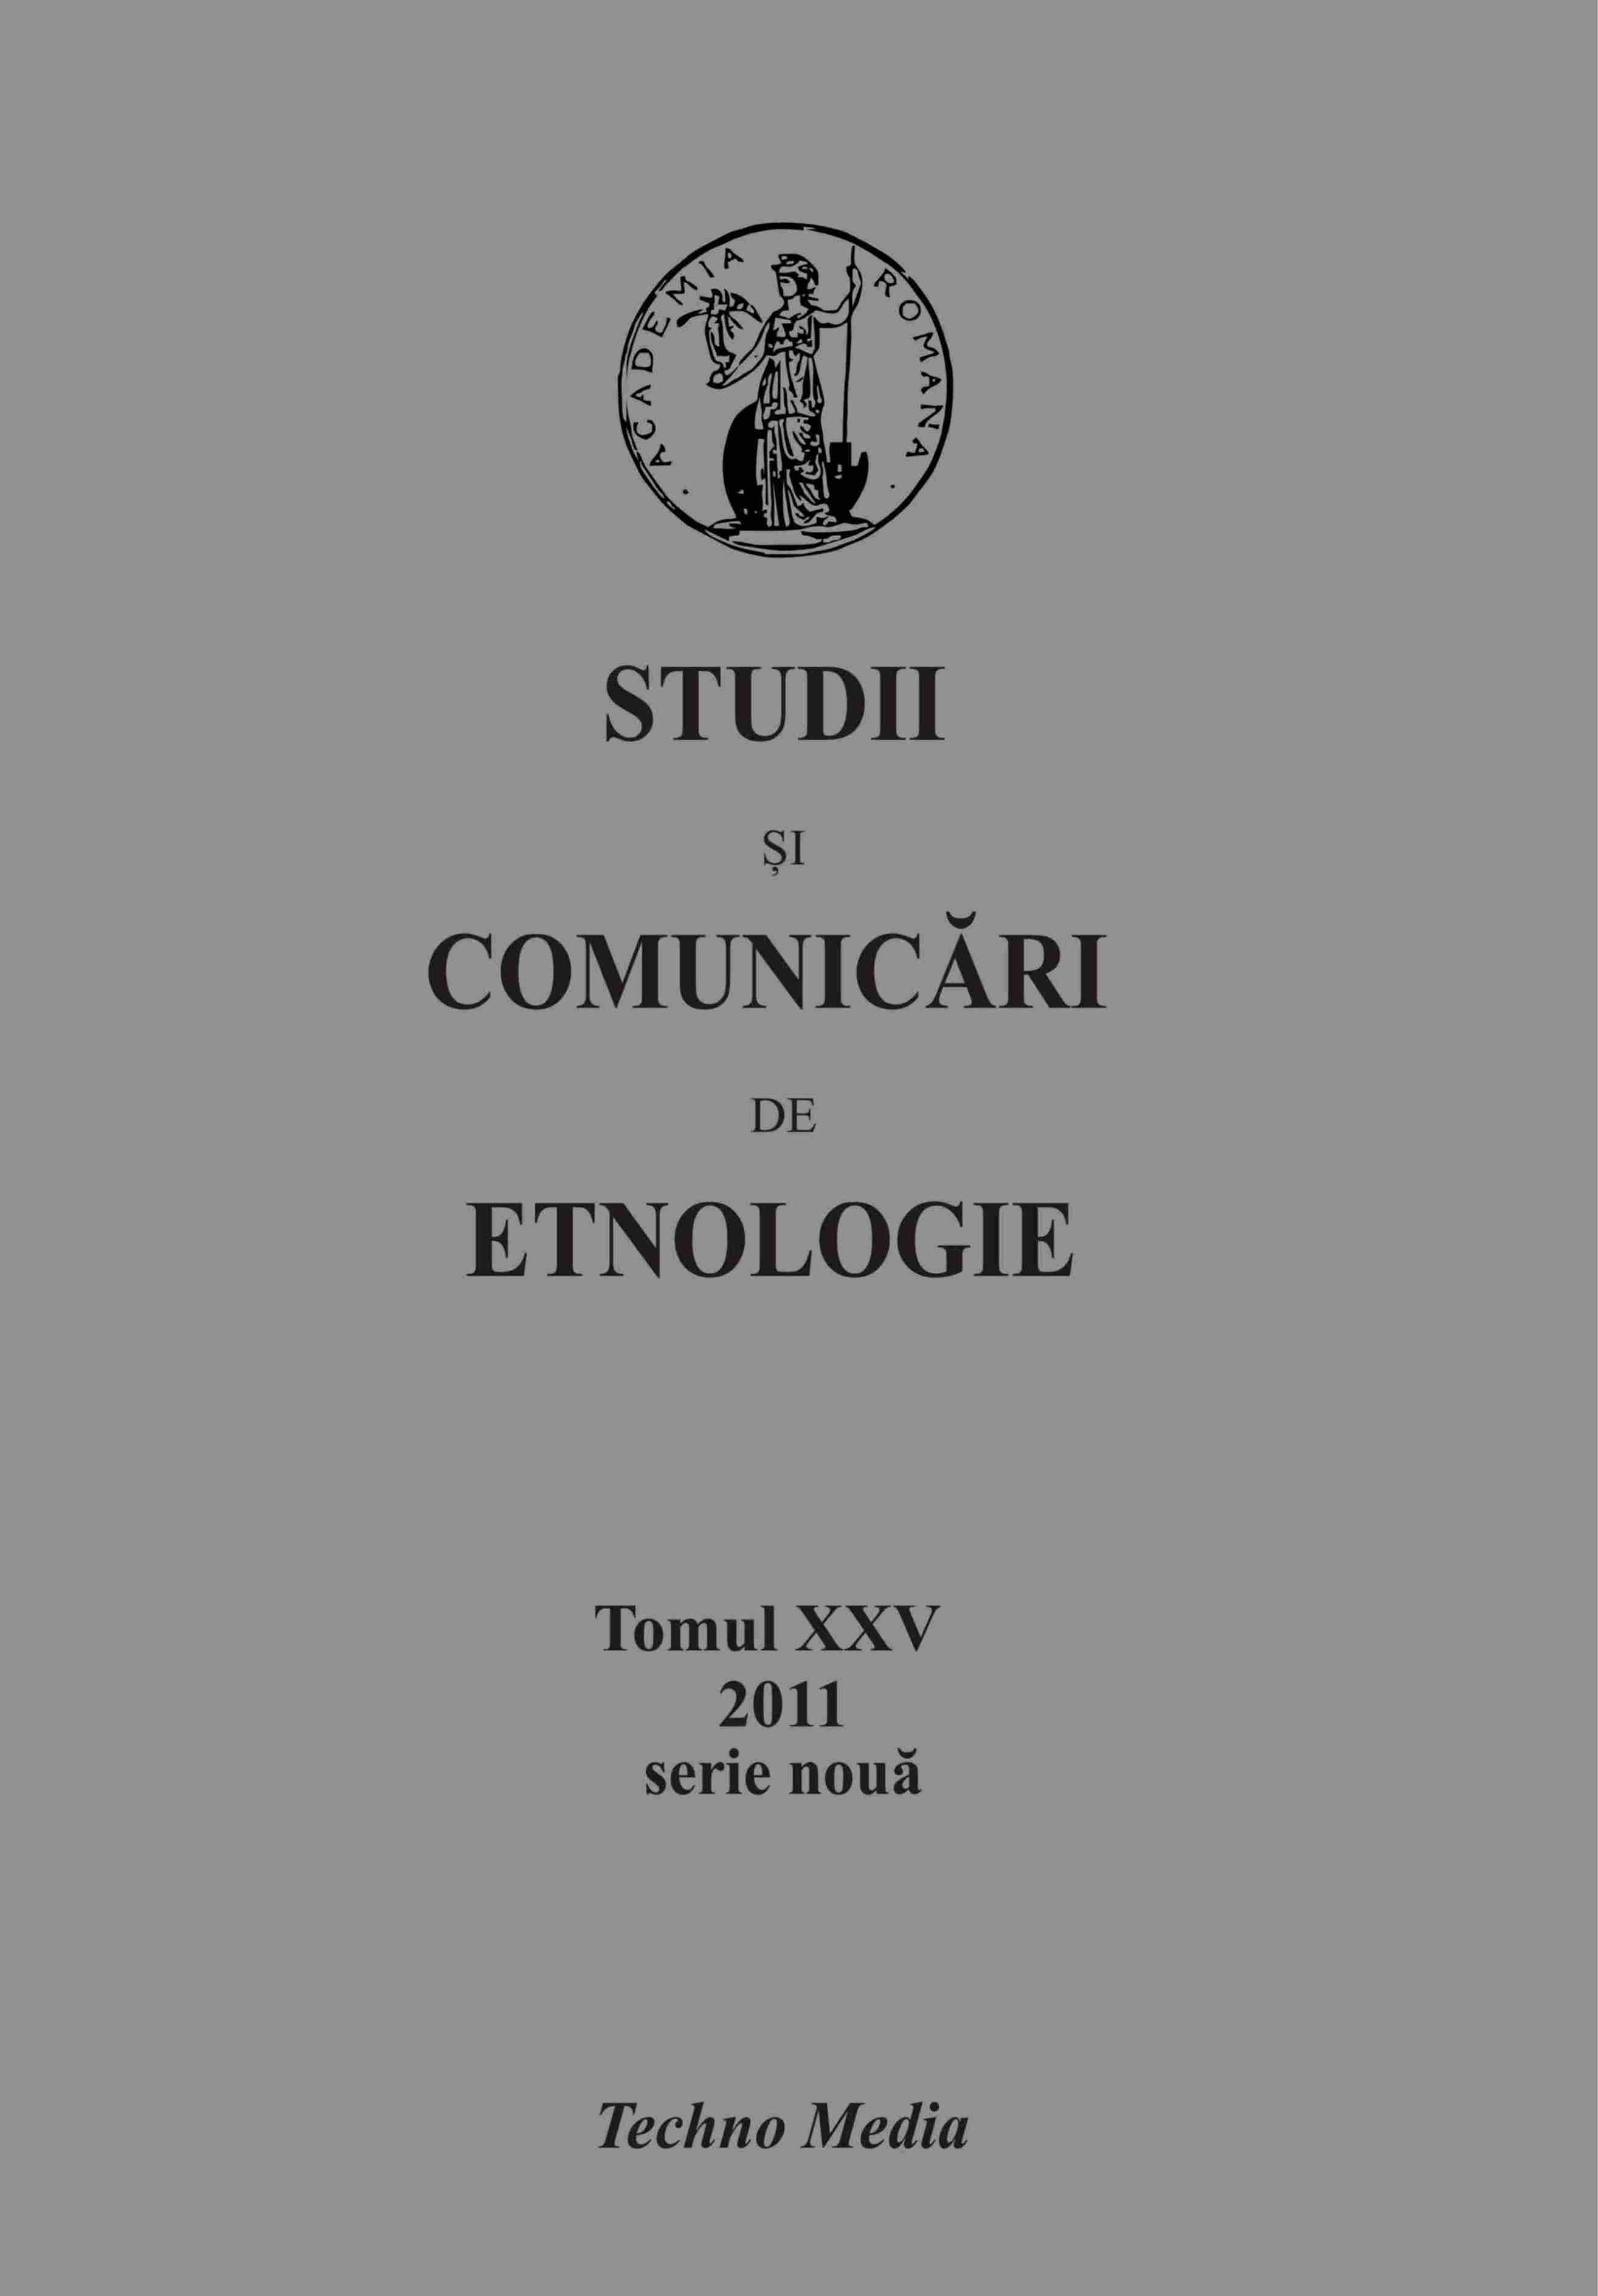 Four Decades of Philological Education in Sibiu: Concerns of Ethnology and Folklore Cover Image